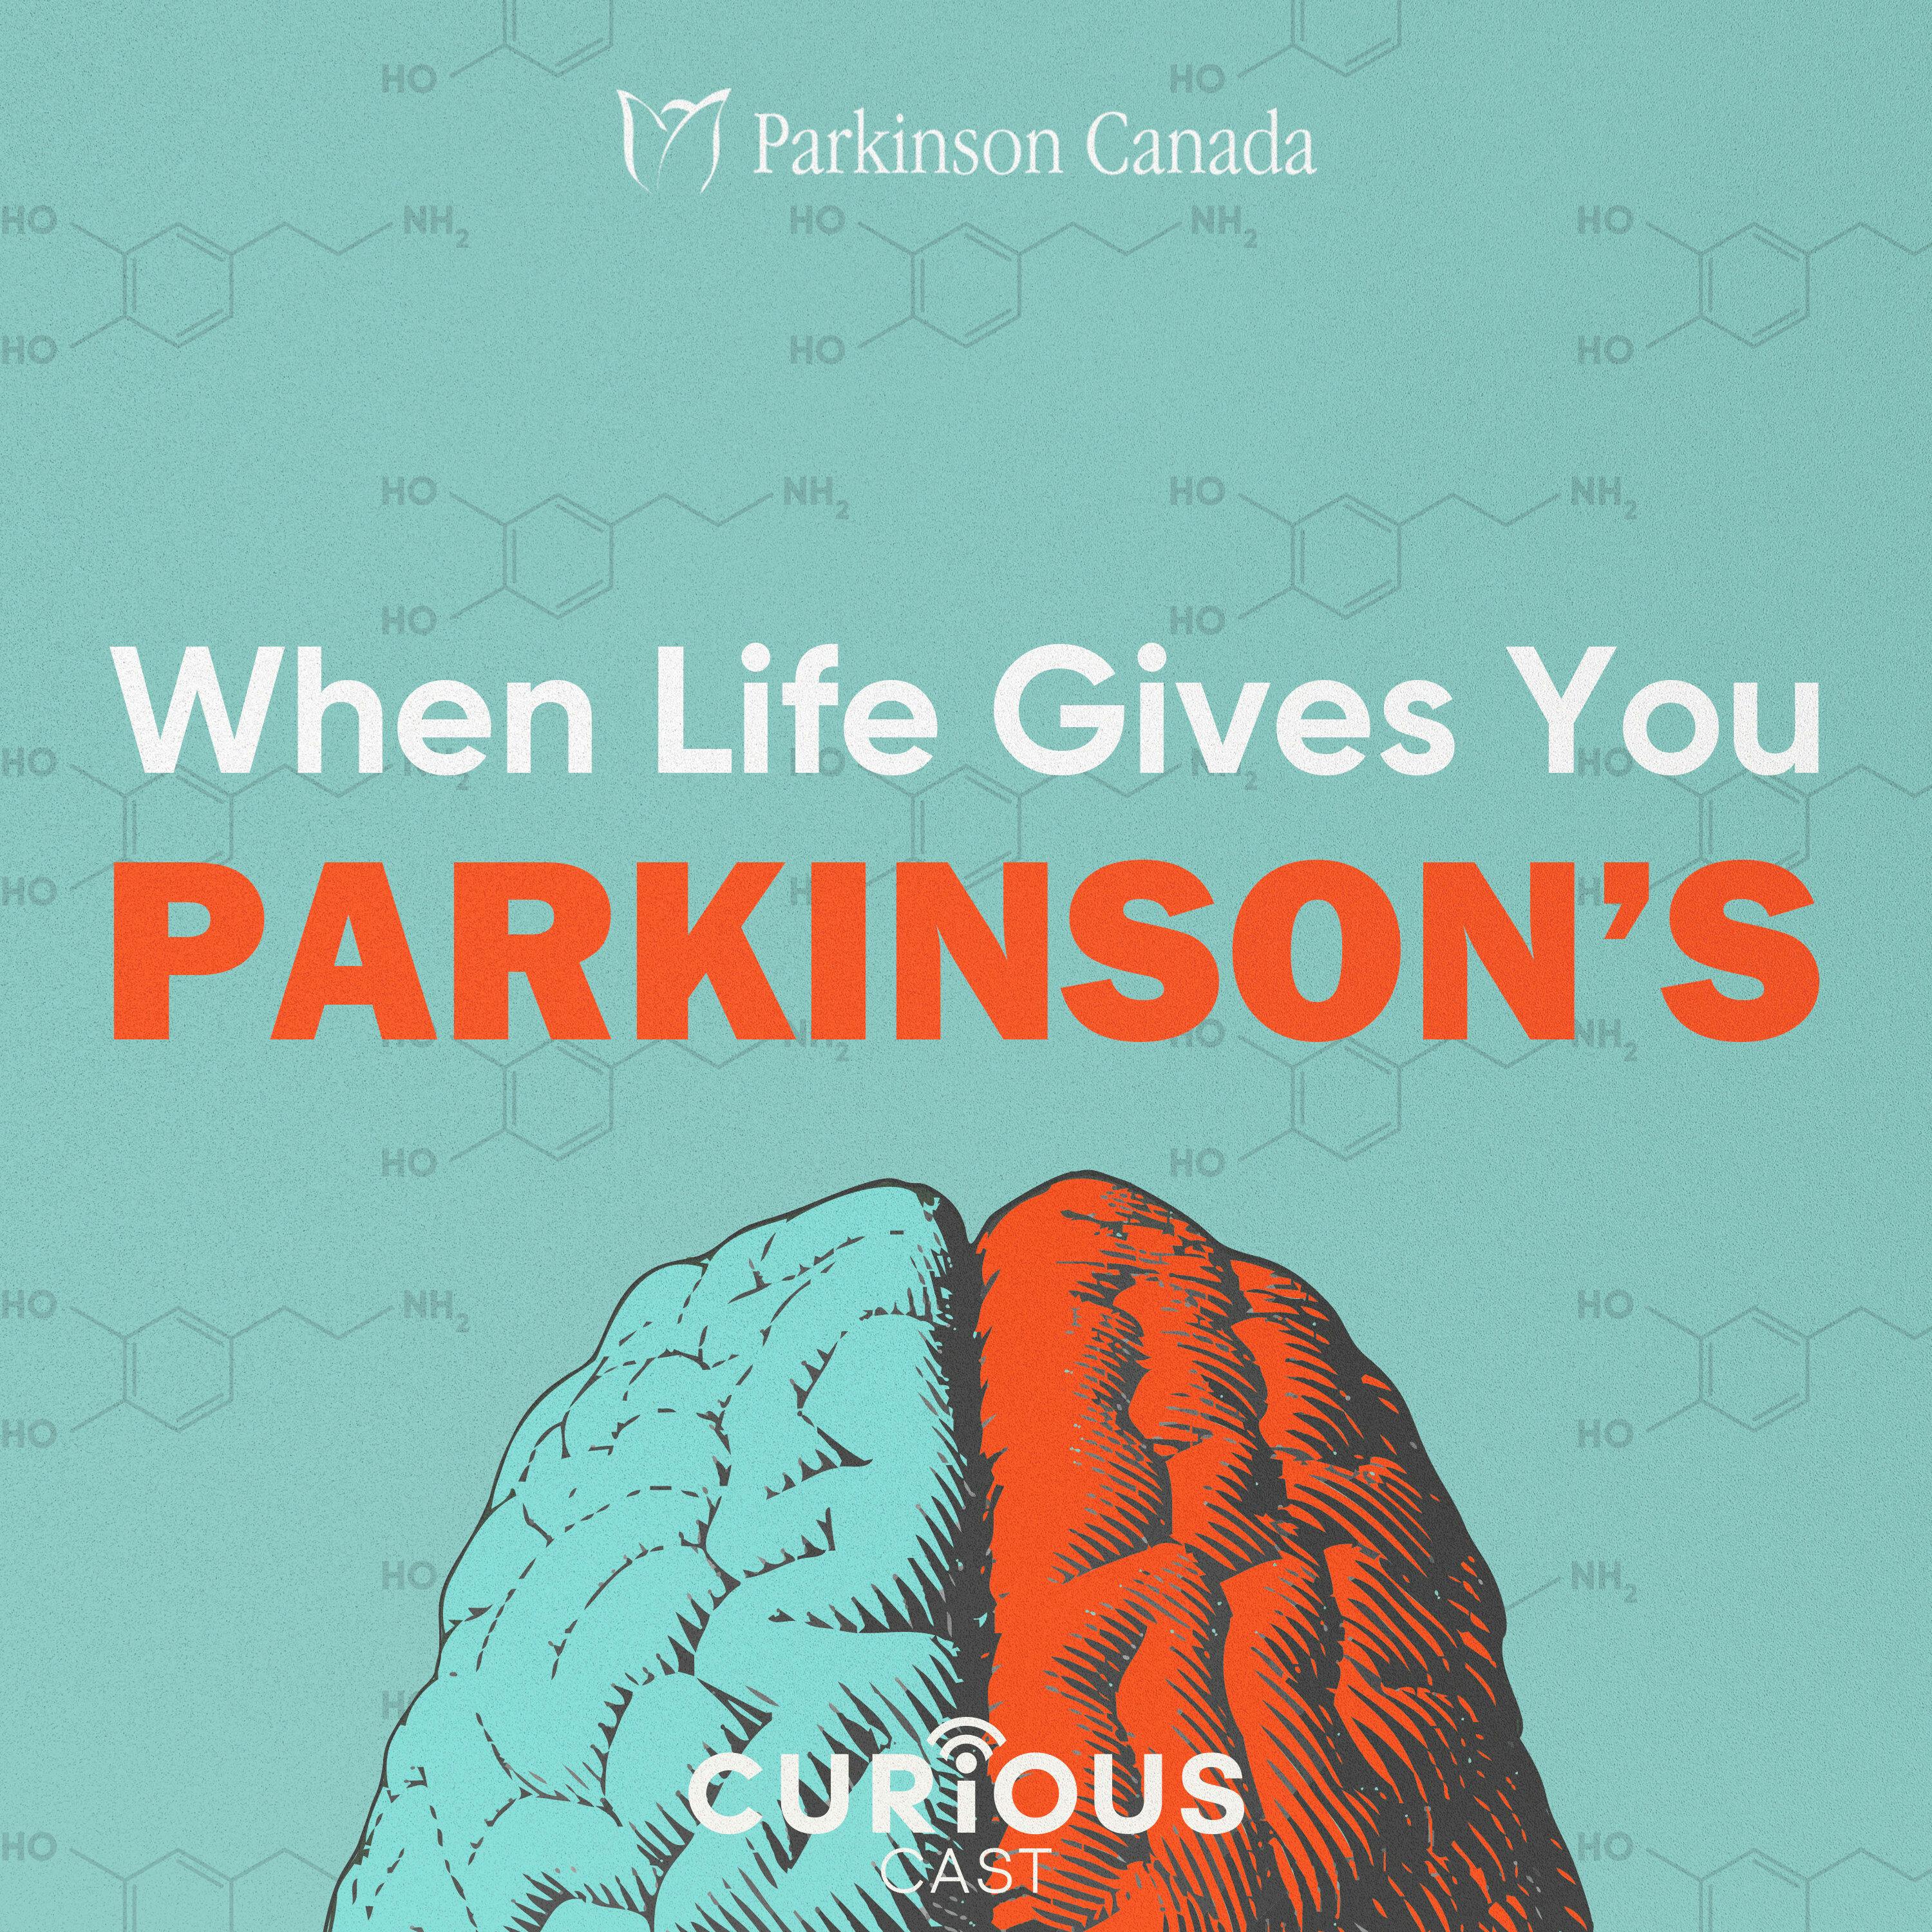 Extra Dosage |  Puppies and Parkinson’s